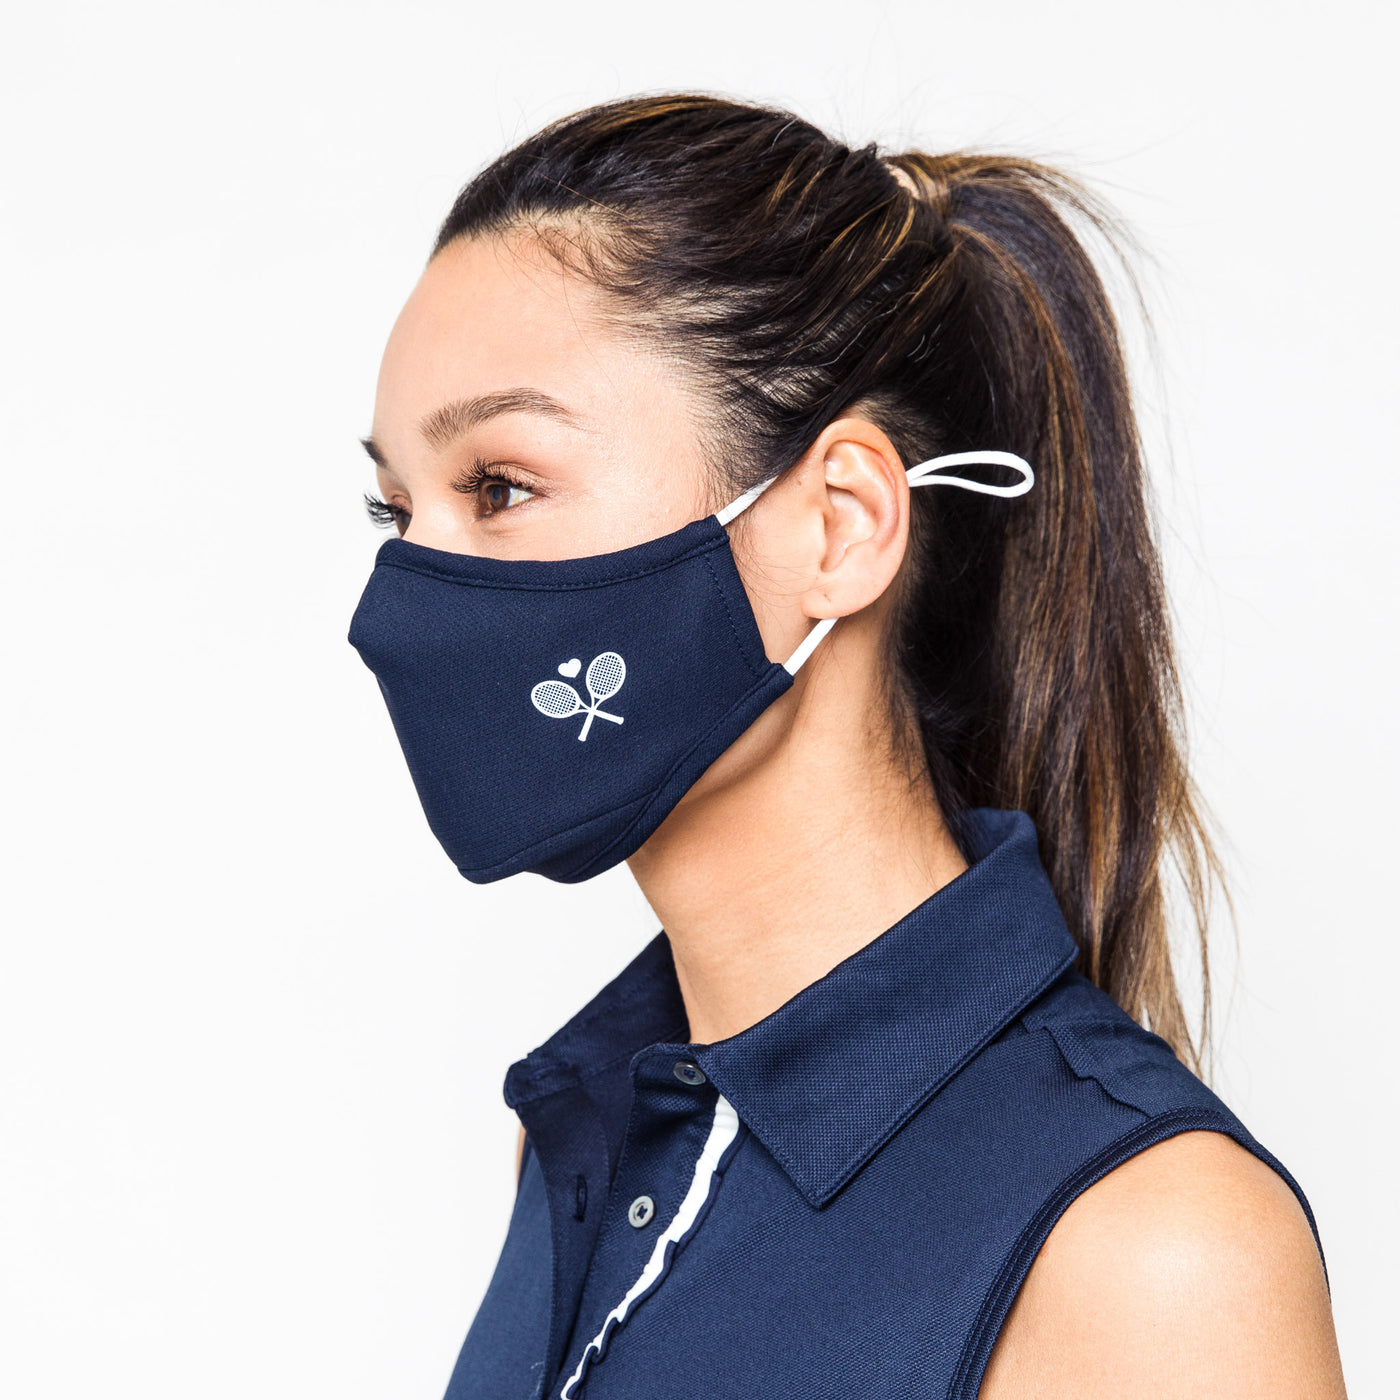 woman wears navy face mask with white crossed racquets printed on one side